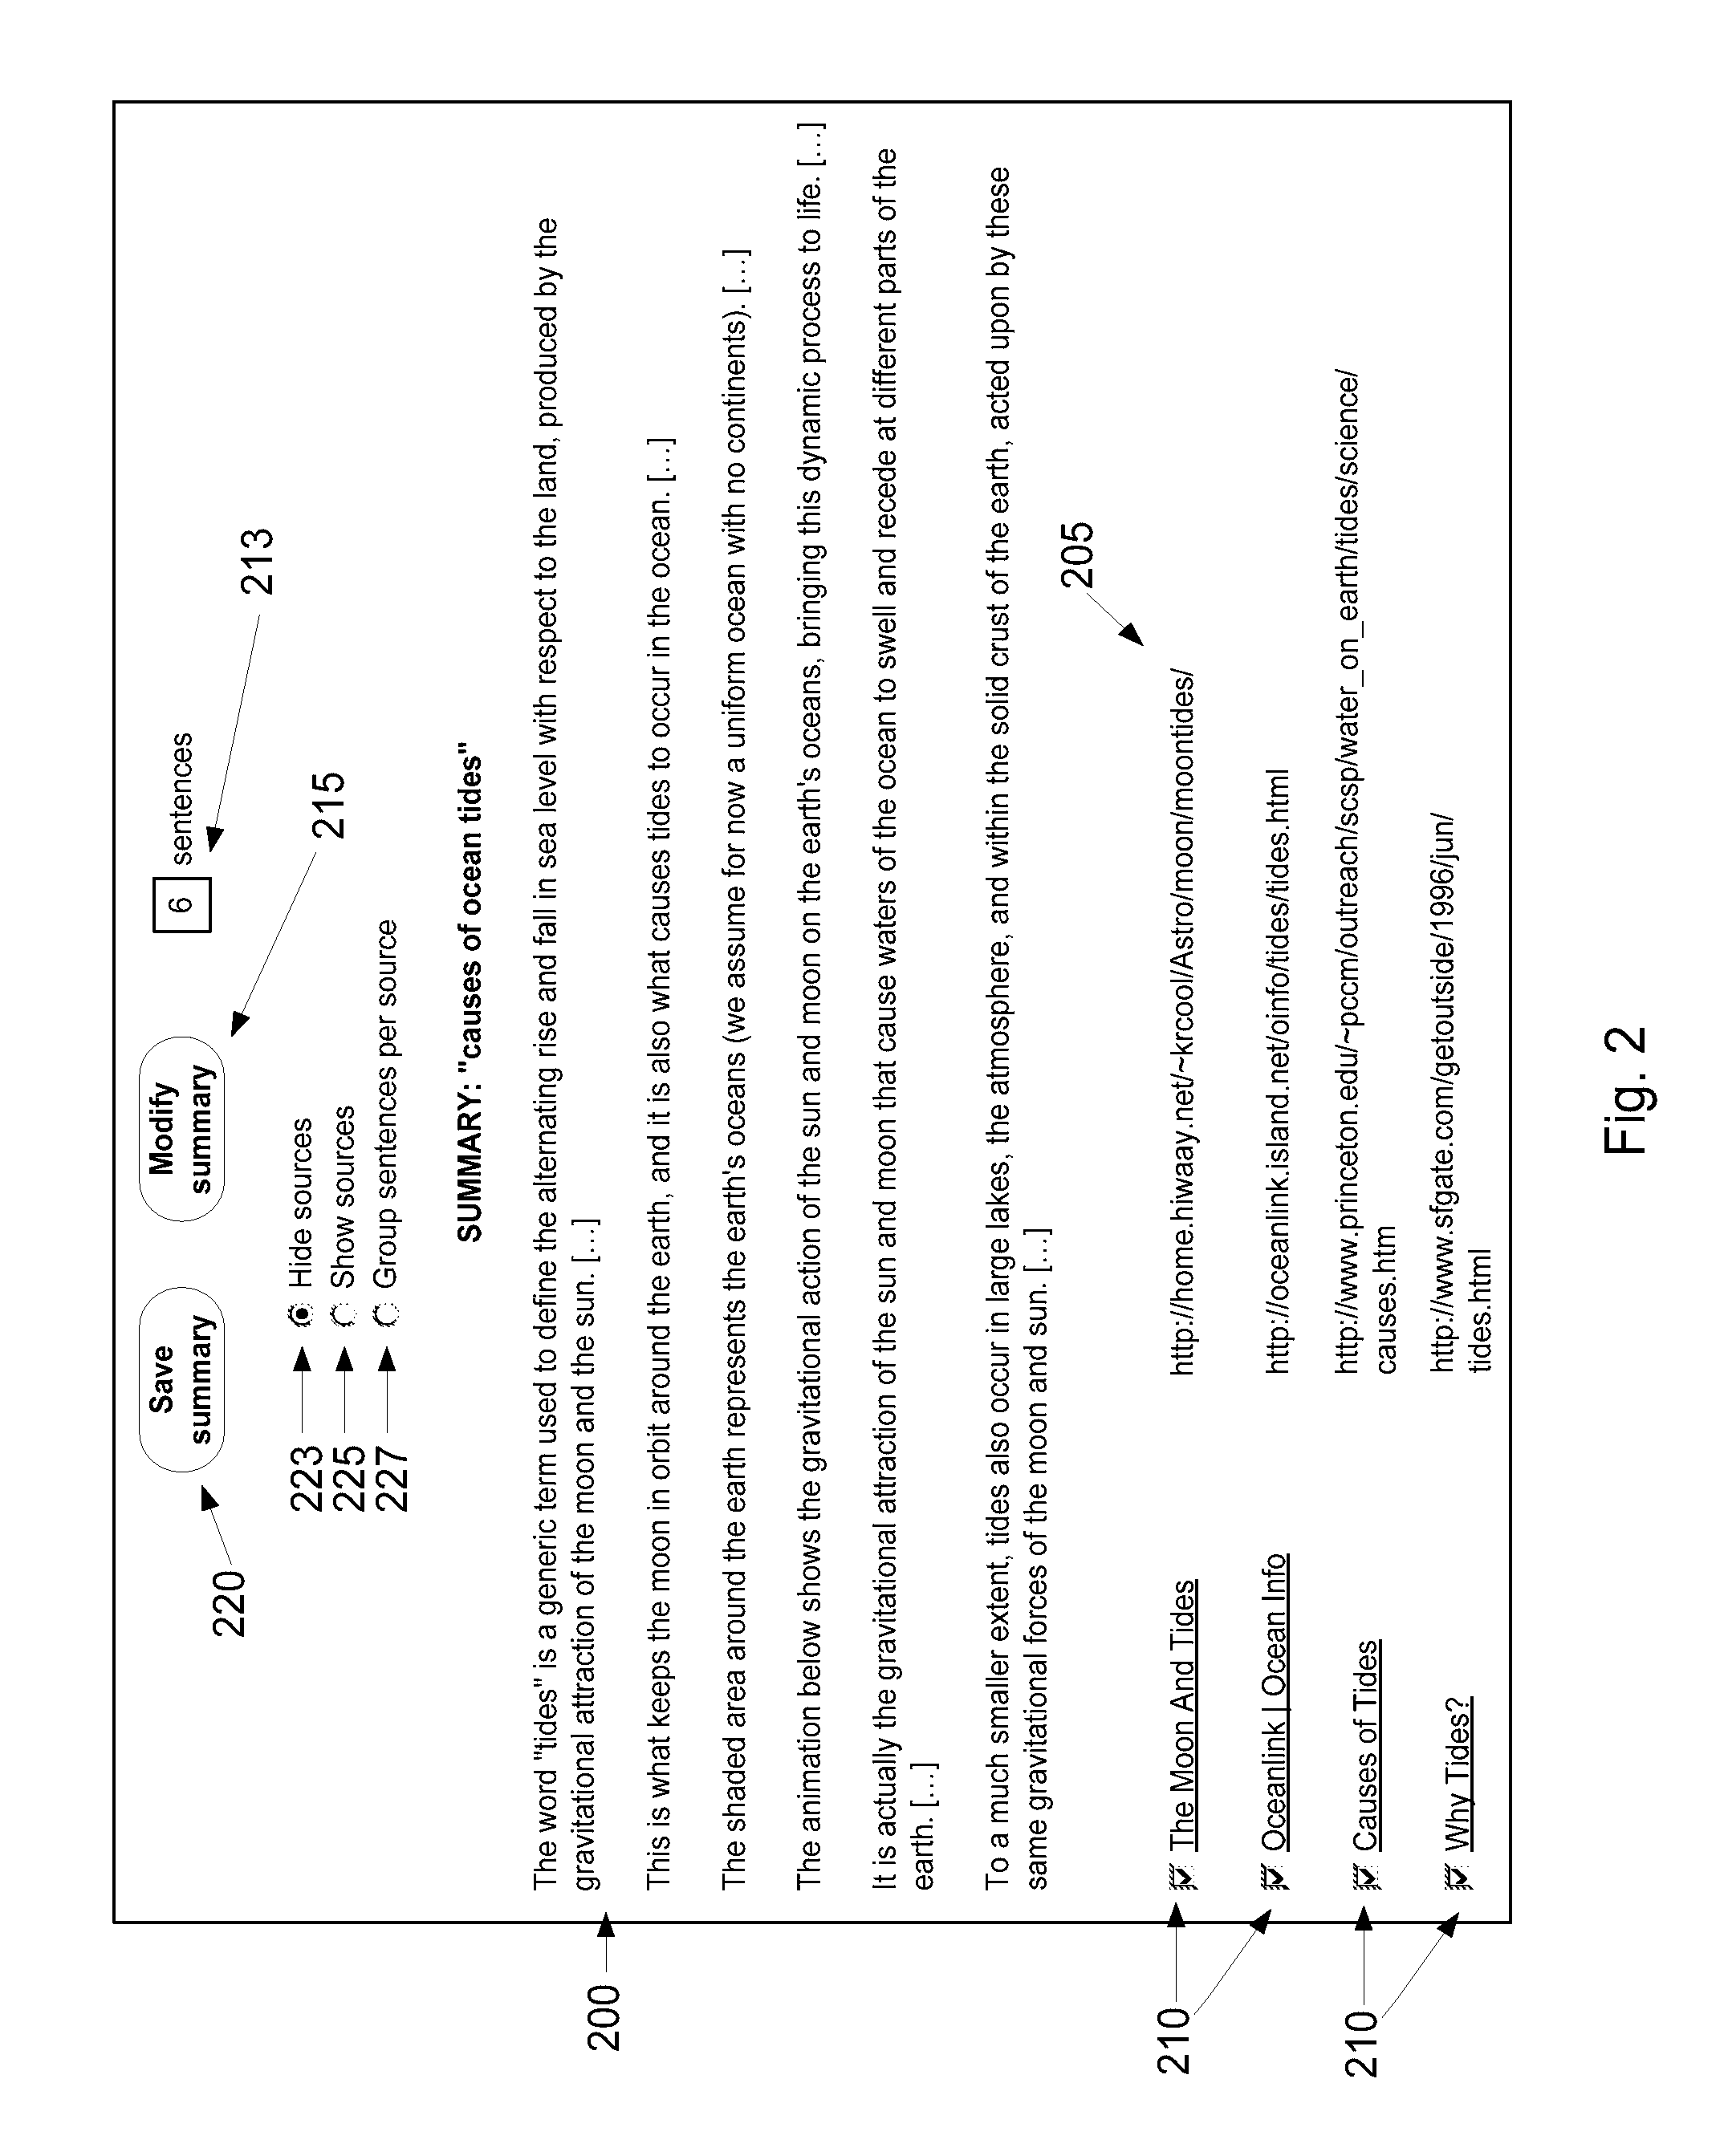 System, method, and user interface for a search engine based on multi-document summarization